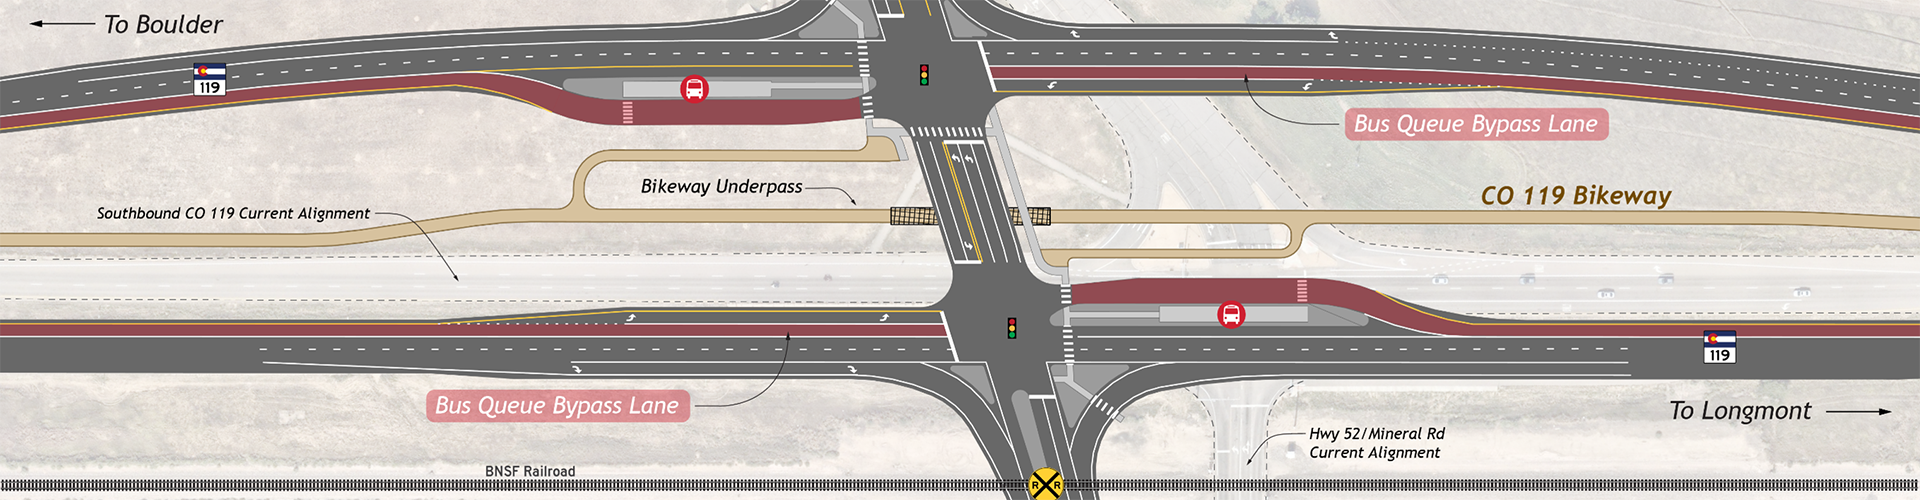 Highway CO119 CO52 intersection design concept